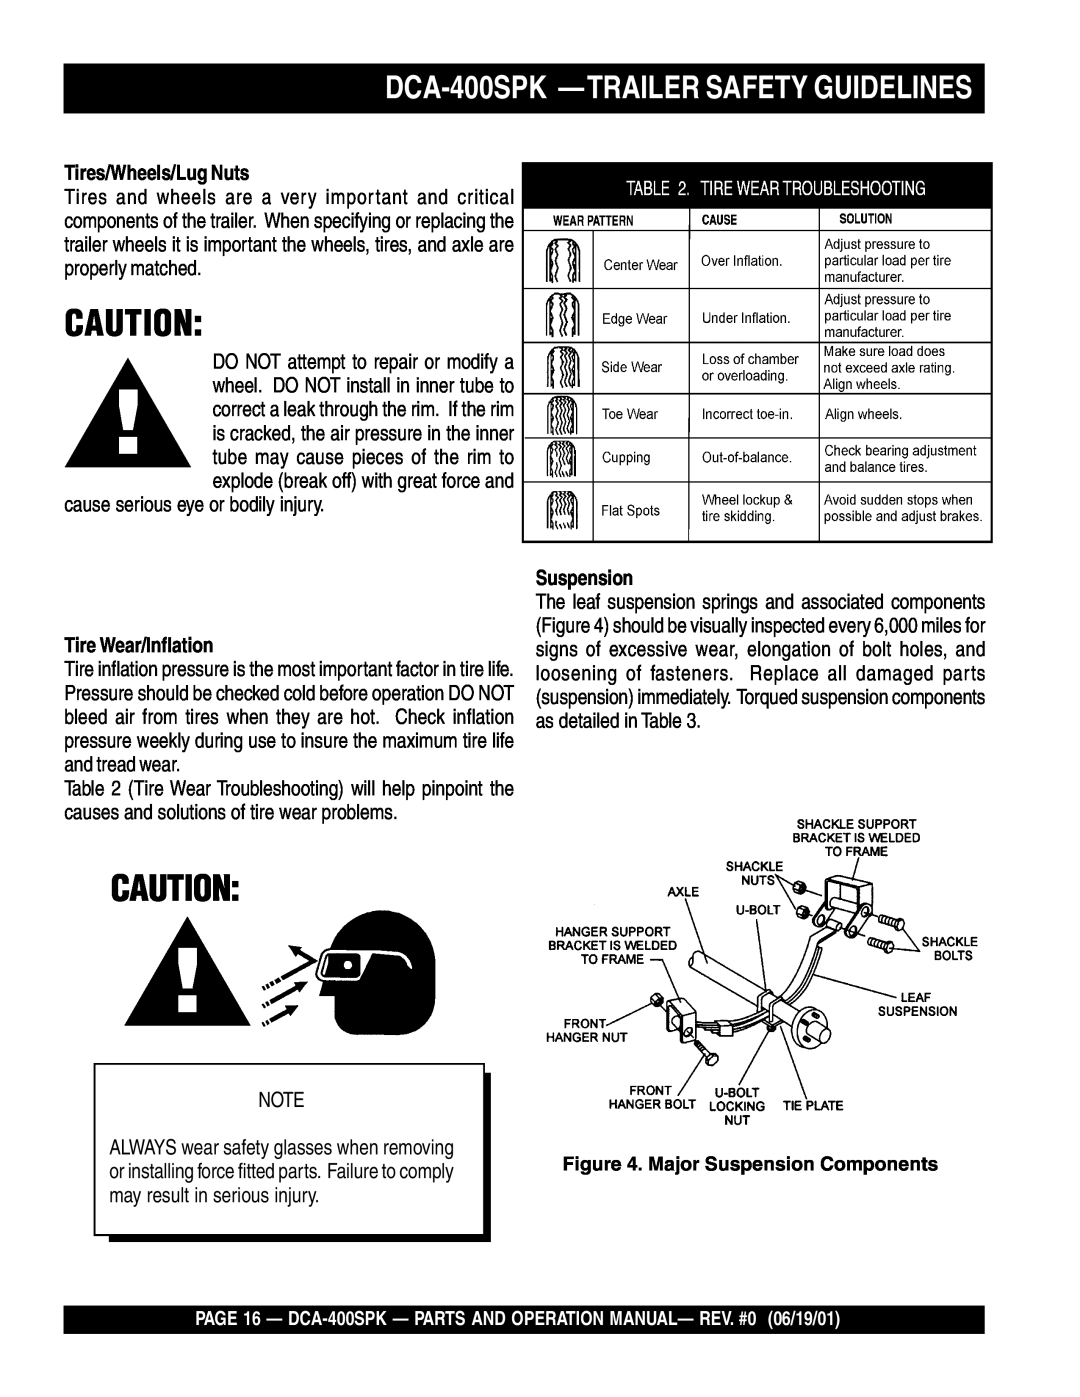 Multiquip operation manual DCA-400SPK —TRAILERSAFETY GUIDELINES, Tires/Wheels/Lug Nuts, Tire Wear/Inflation, Suspension 